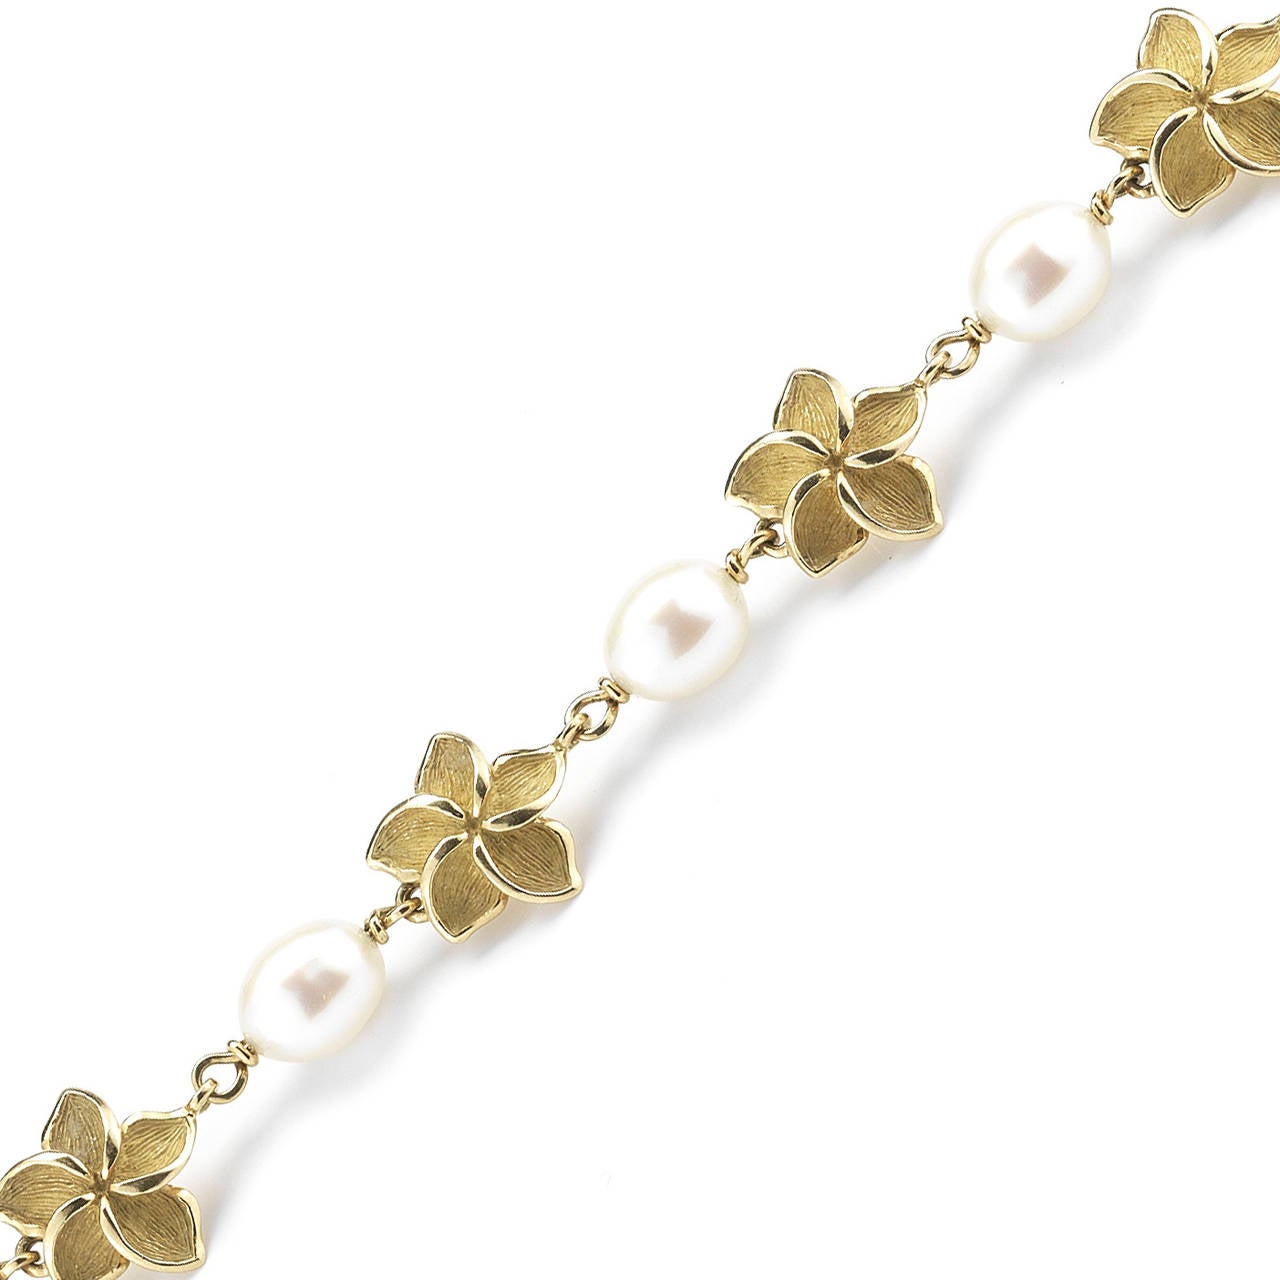 This Tiffany & Co. bracelet is classic and an elegant every day piece. The bracelet alternates between 18k gold flower  and pearls, adding a very feminine and floral touch to a gold bracelet. Stamped Tiffany & Co., 750.  It is 7